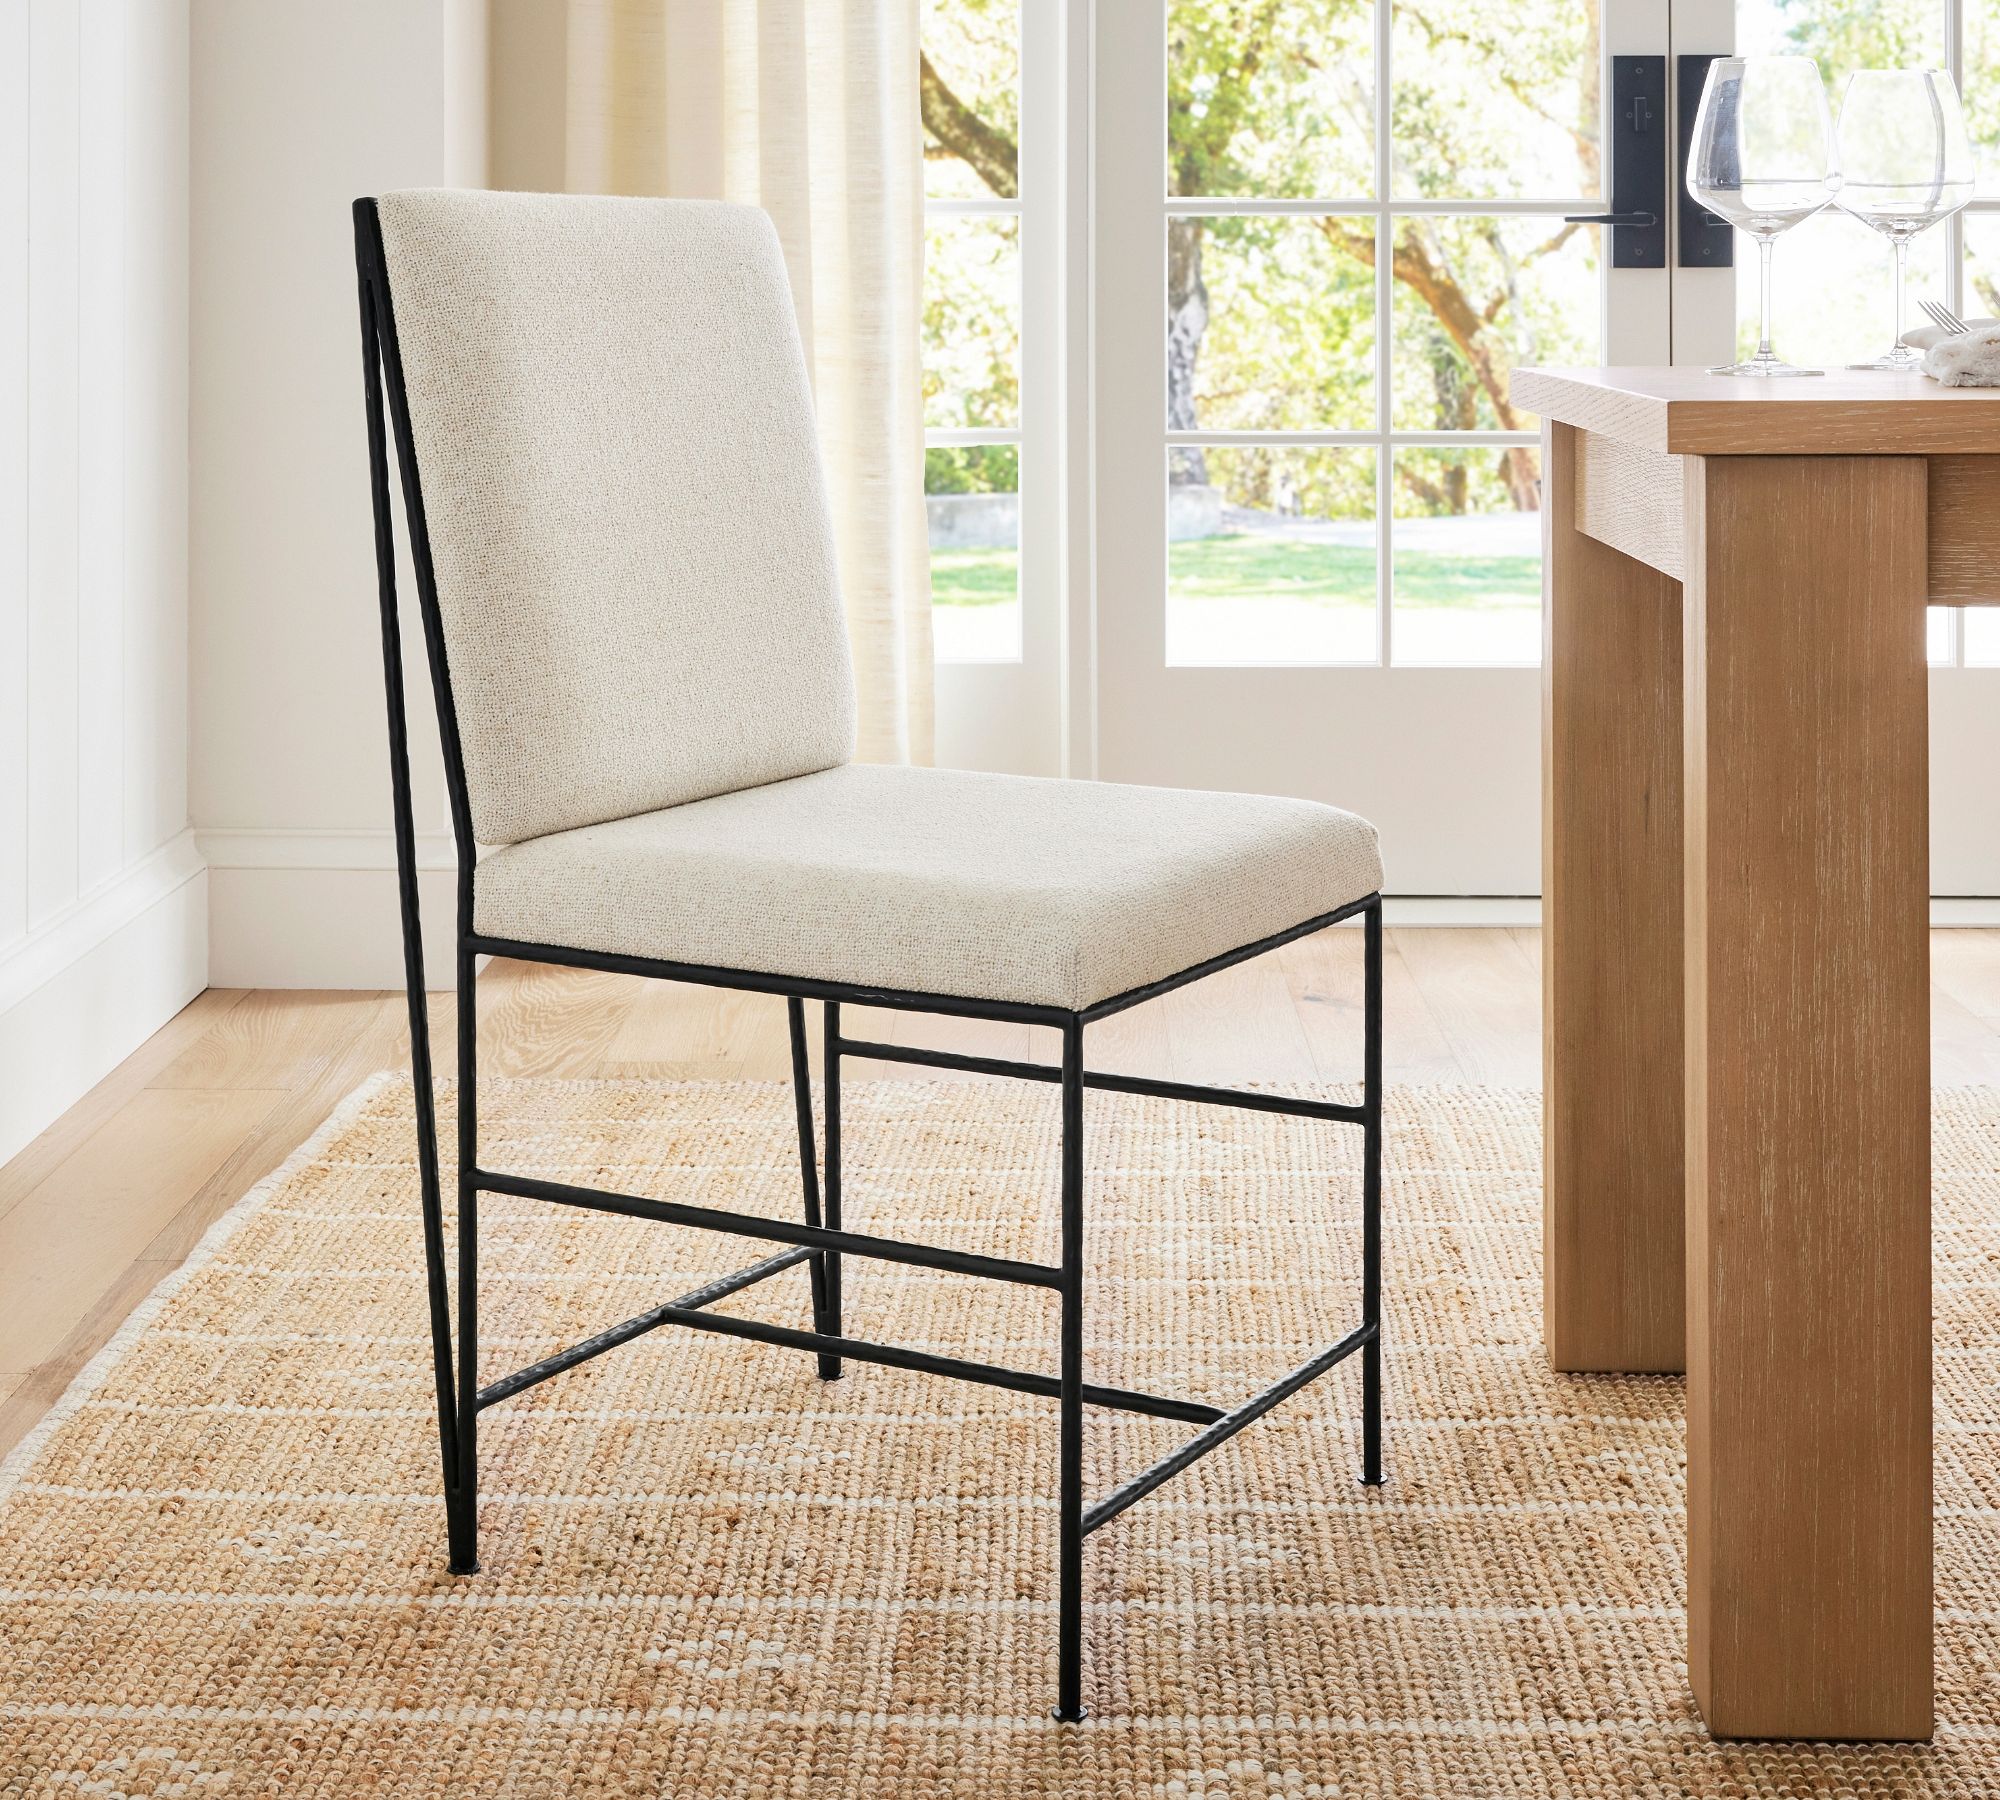 Rockwell Upholstered Dining Chair